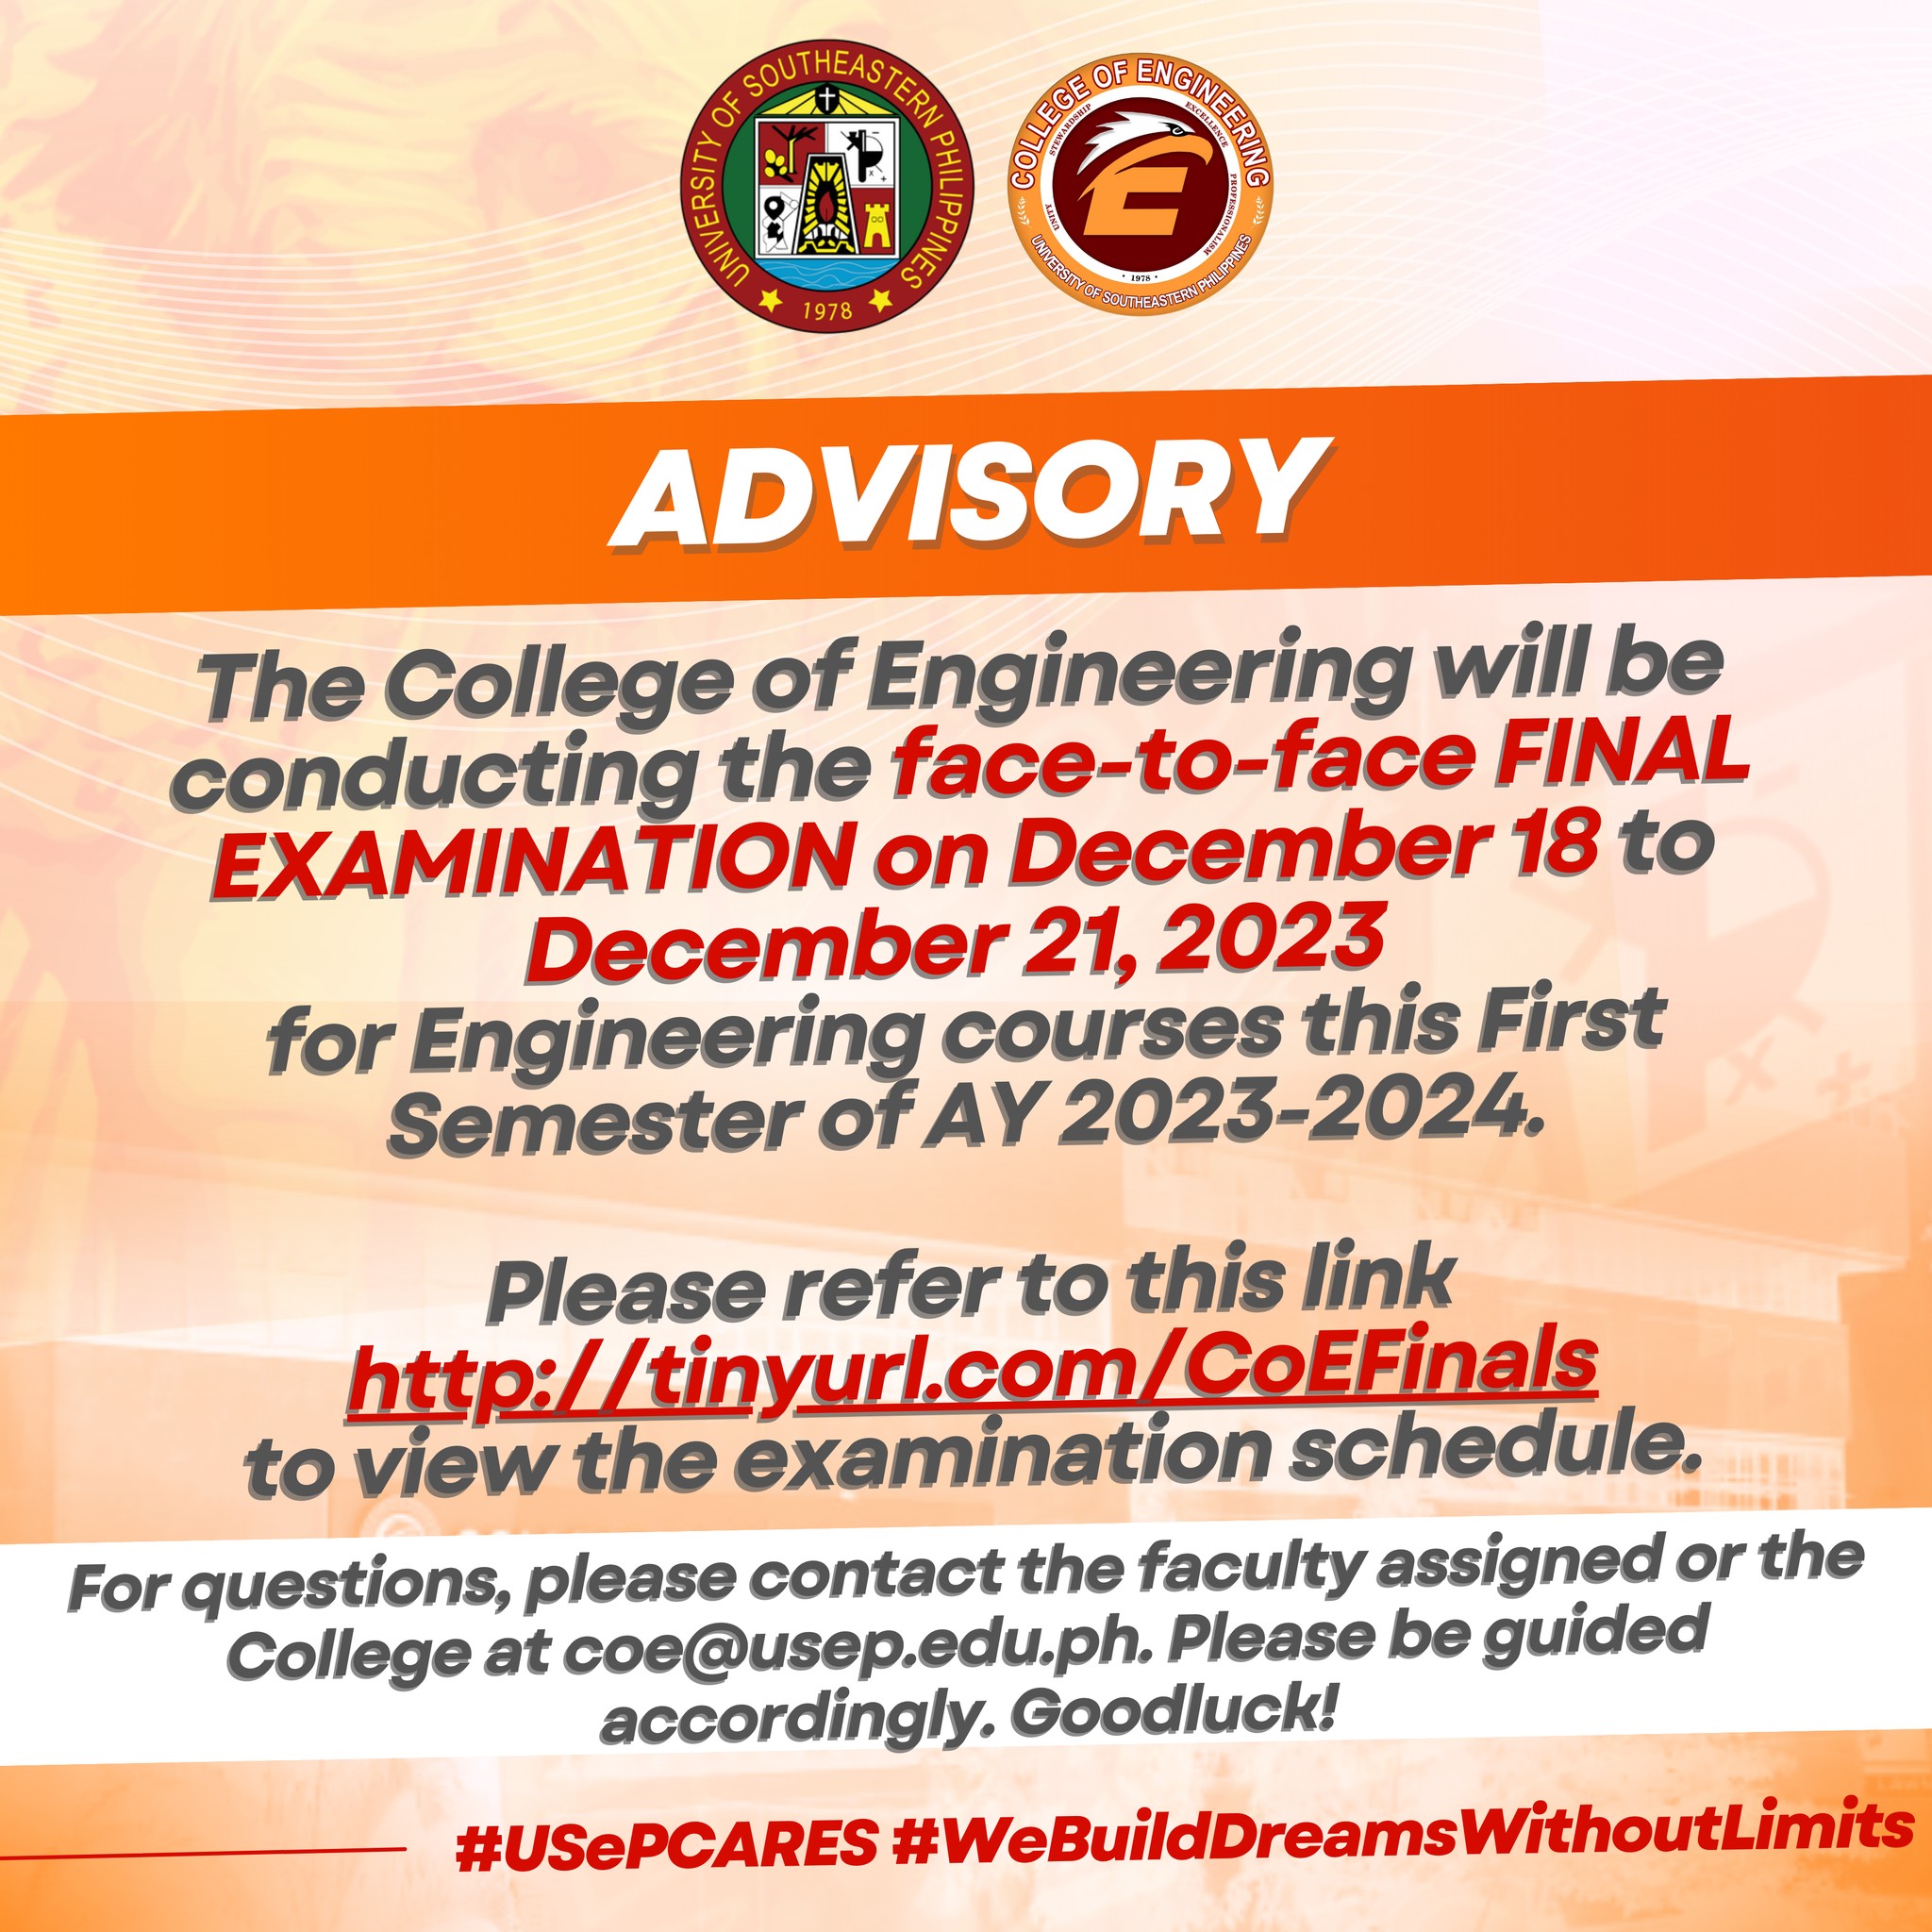 Final Examination Schedule for First Semester AY 2023-2024